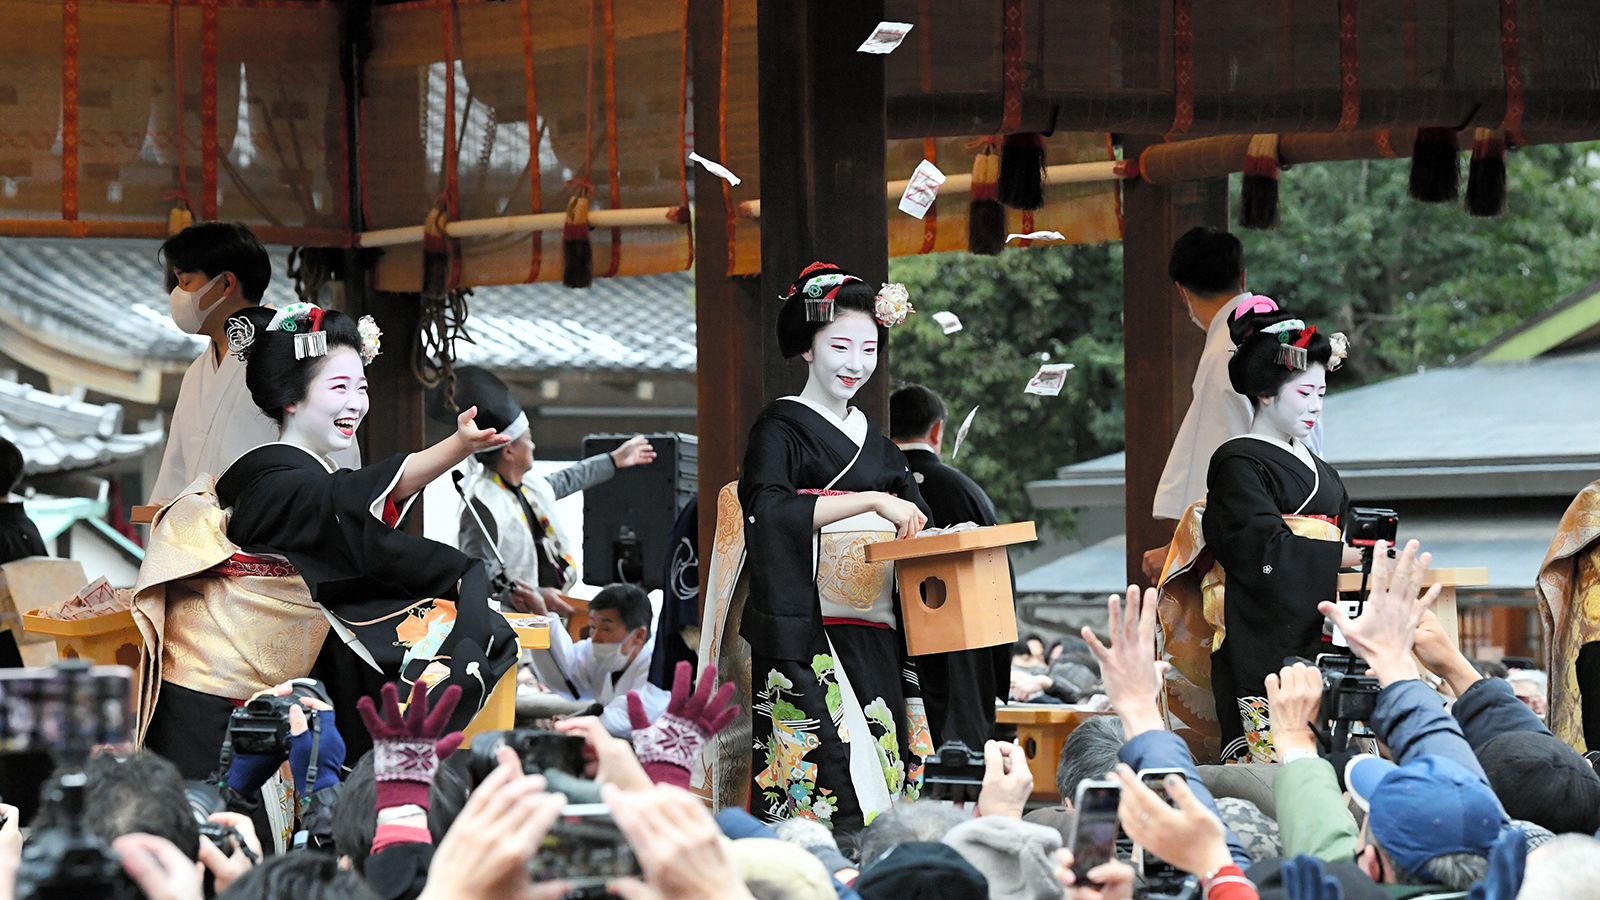 Geisha paparazzi' are back in Kyoto – and the city is ready to take action